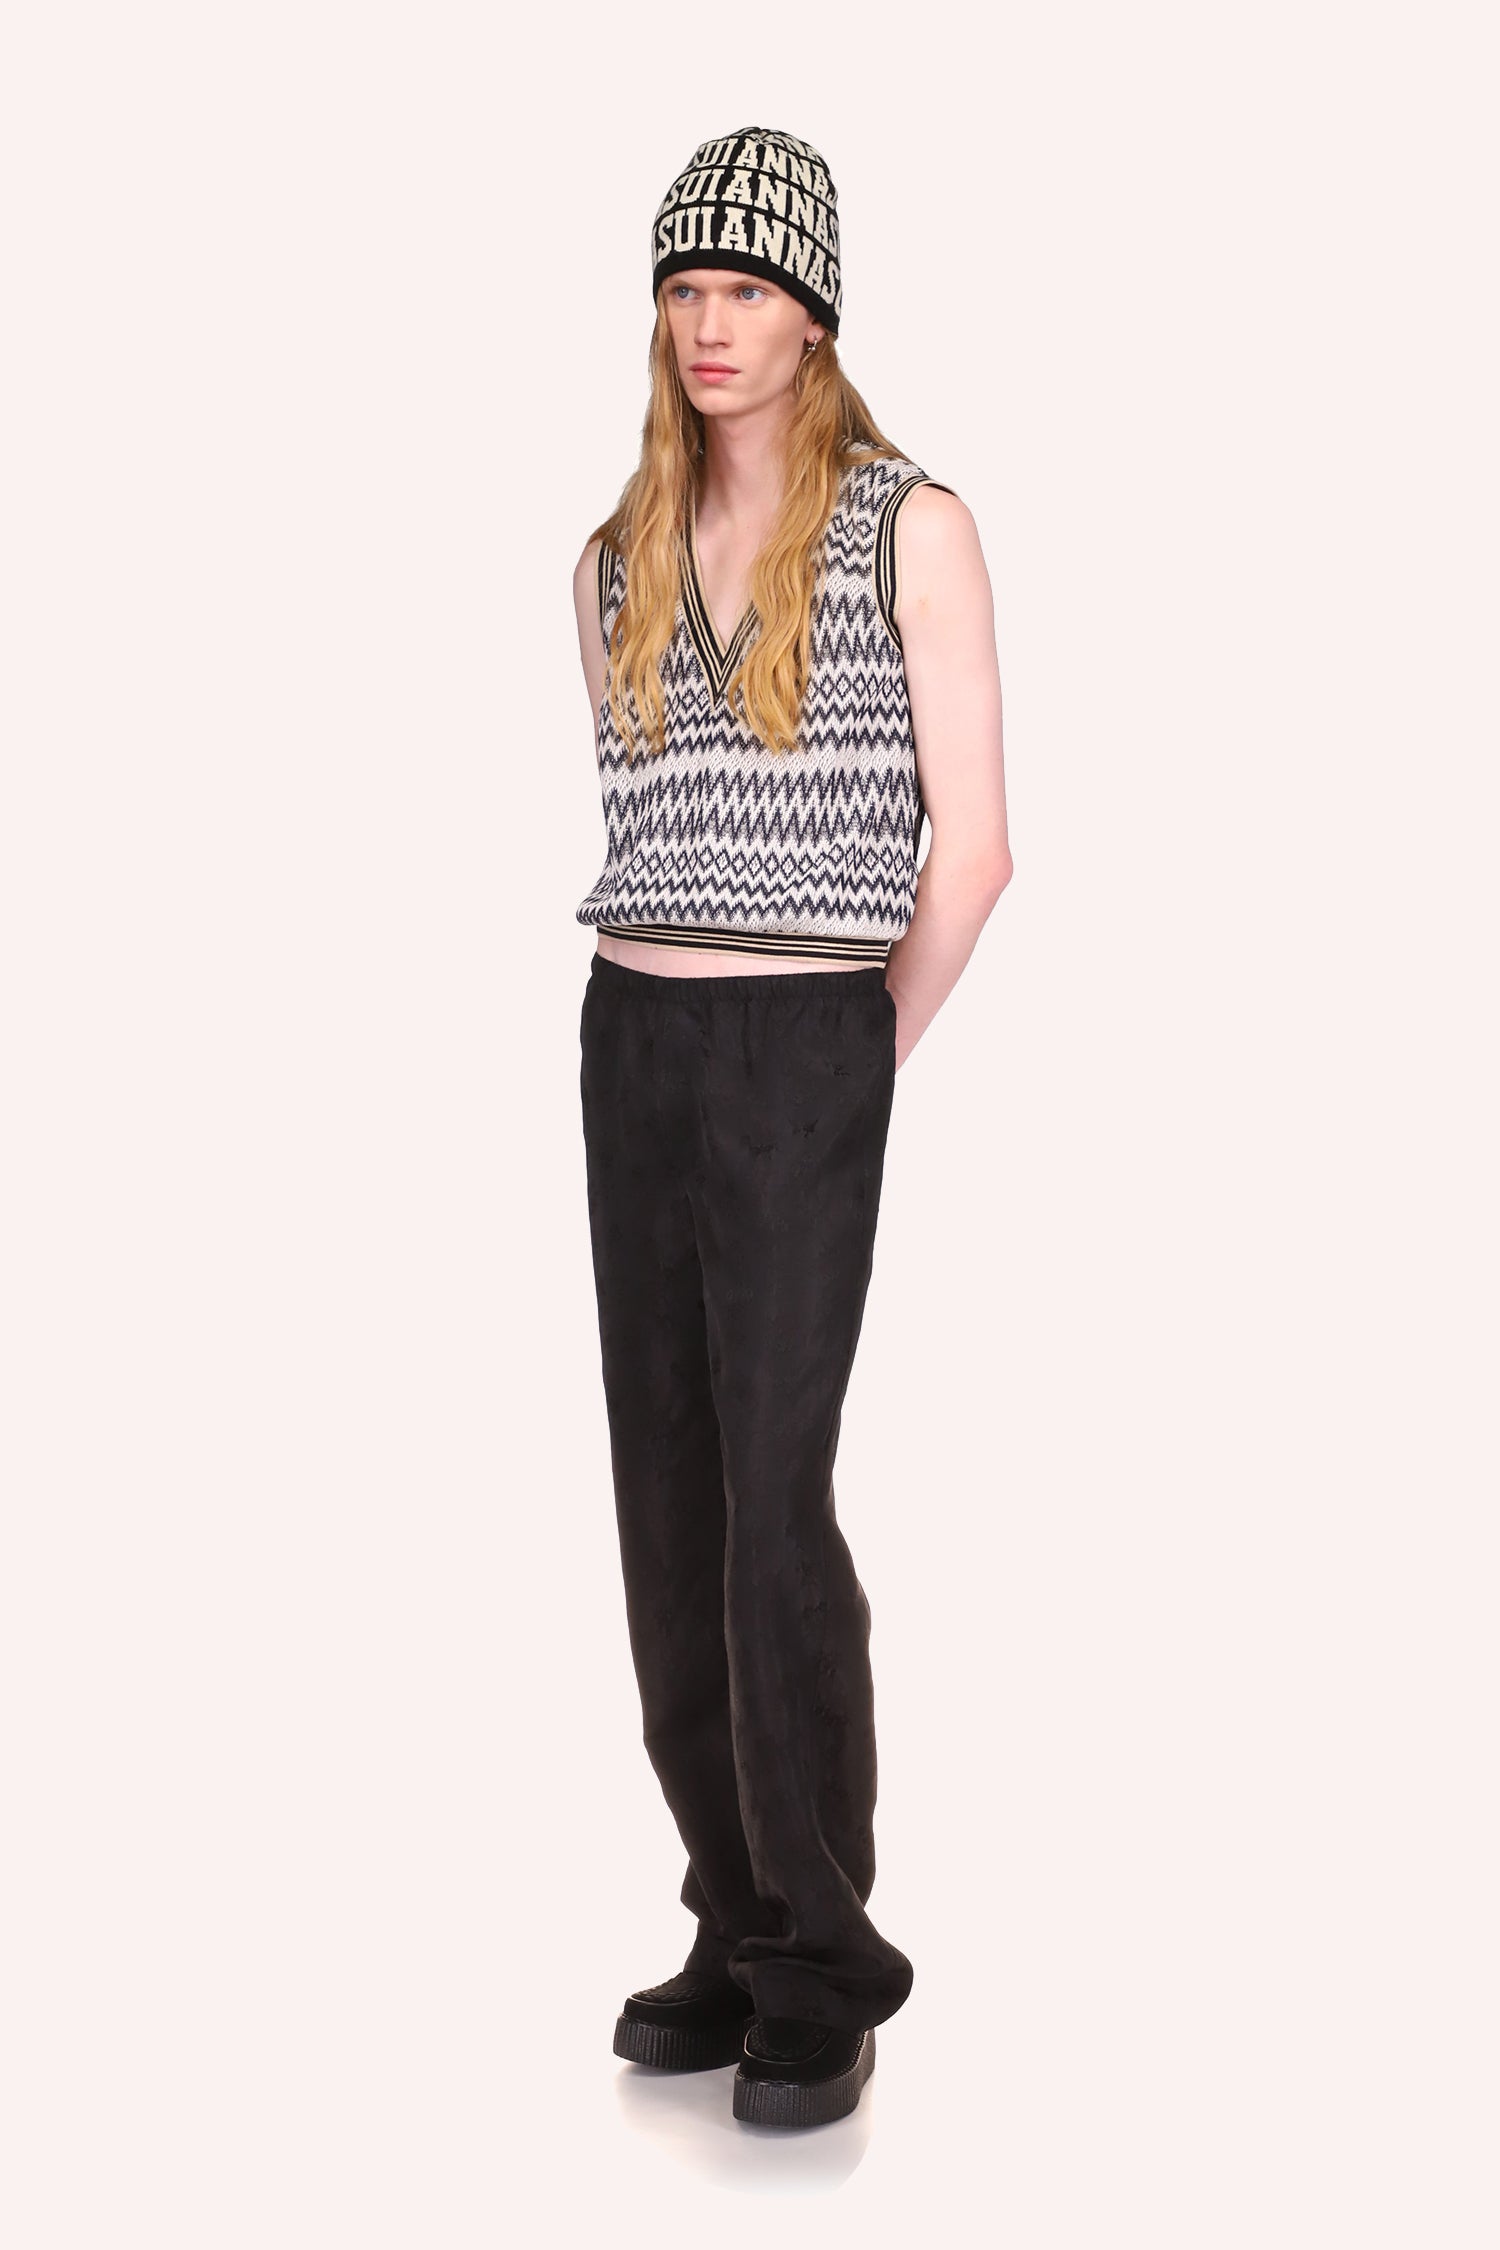 Black Jacquard Pants, long over the shoes, with a waist band paired with Zigzag Vest Black